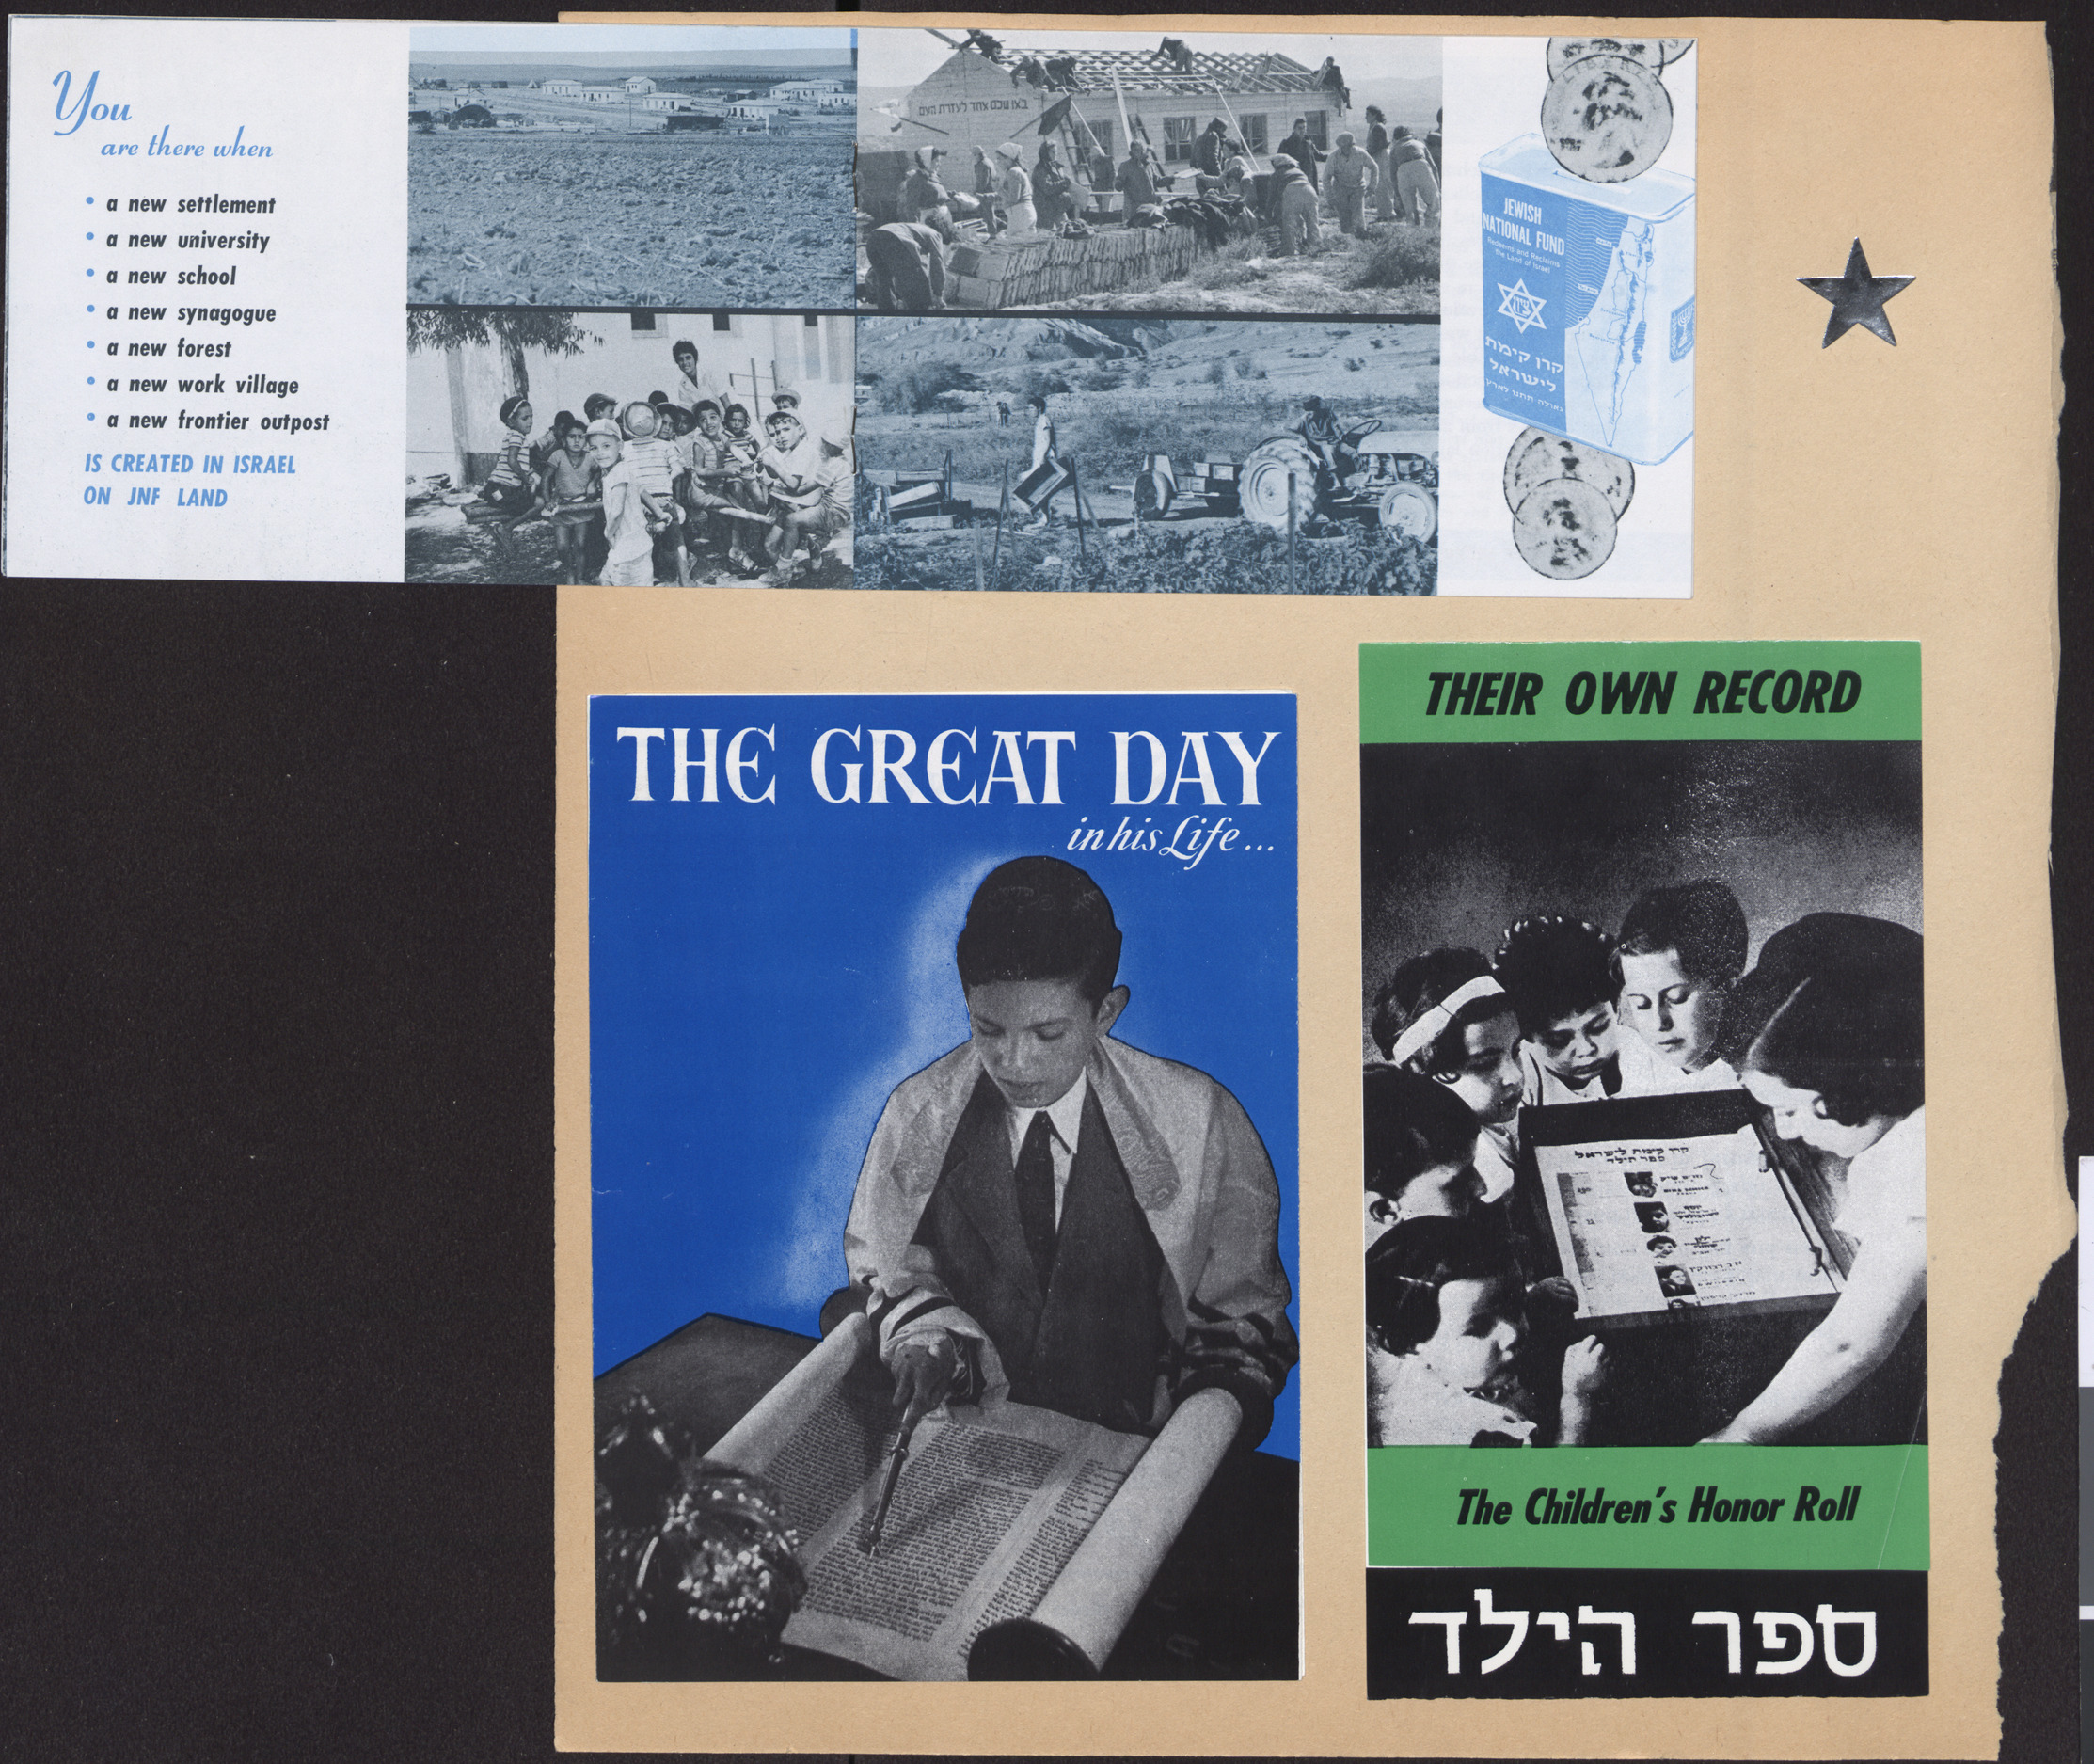 Pamphlets, The Box That Built a Nation, Jewish National Fund, pages 7-8, and The Great Day in his Life (cover), and Their Own Record, the Children's Honor Roll